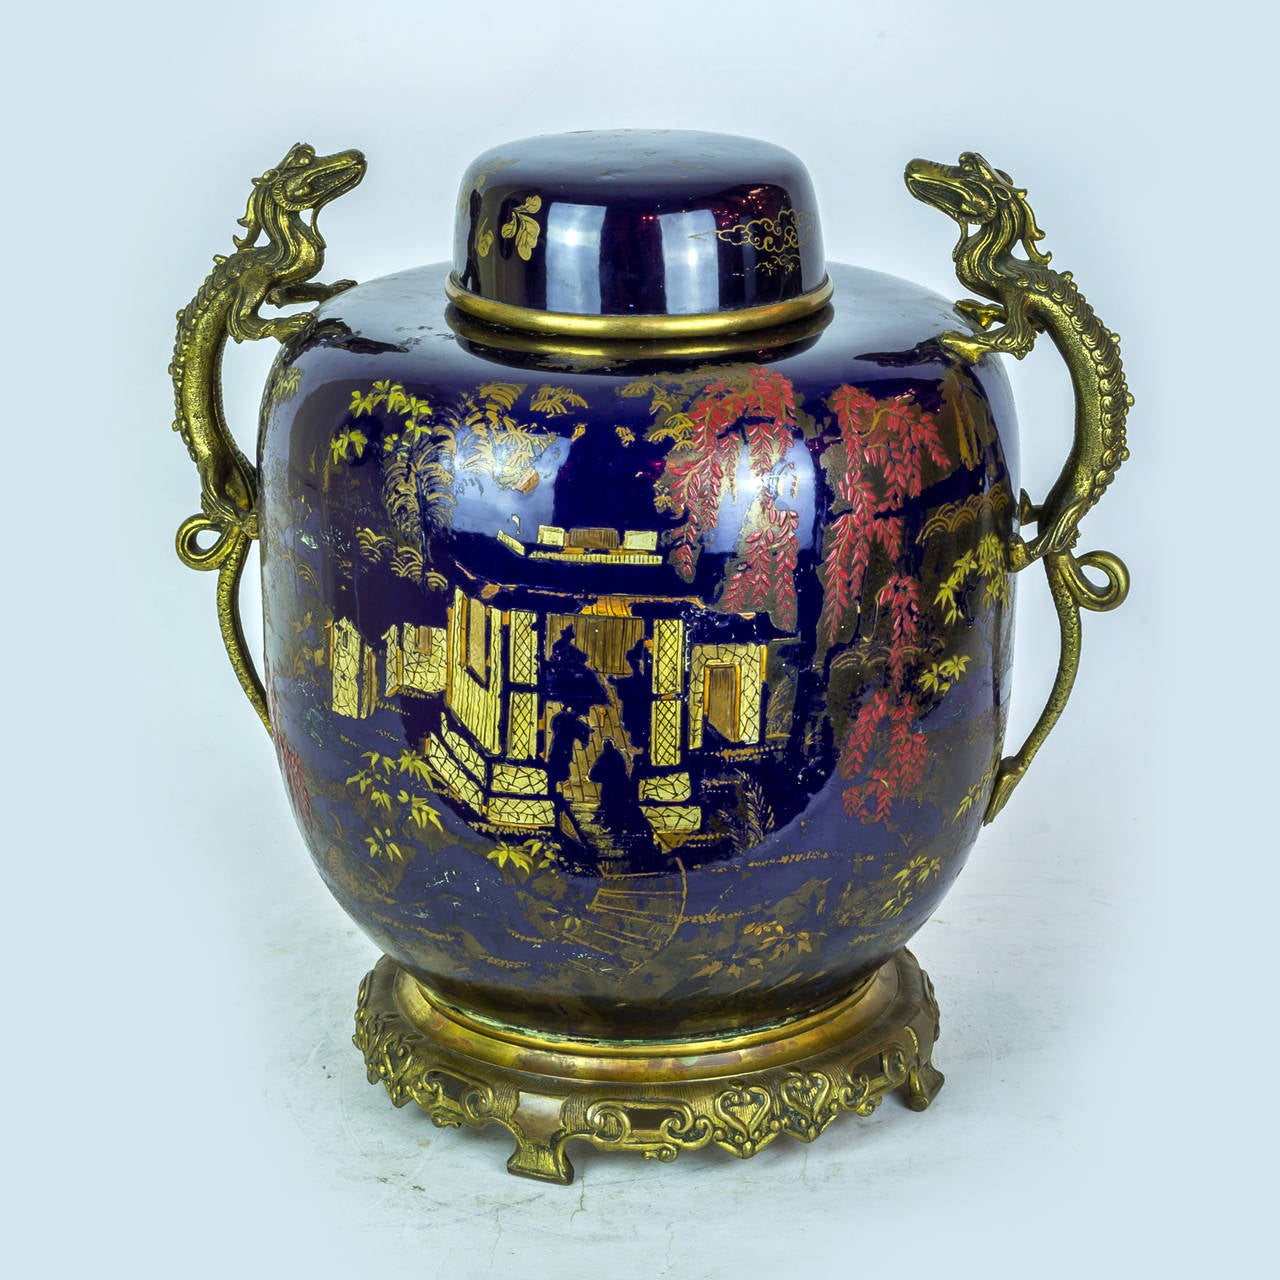 Adirondack Oriental Porcelain Covered Jar with French Bronze Mounted Dragon Handles